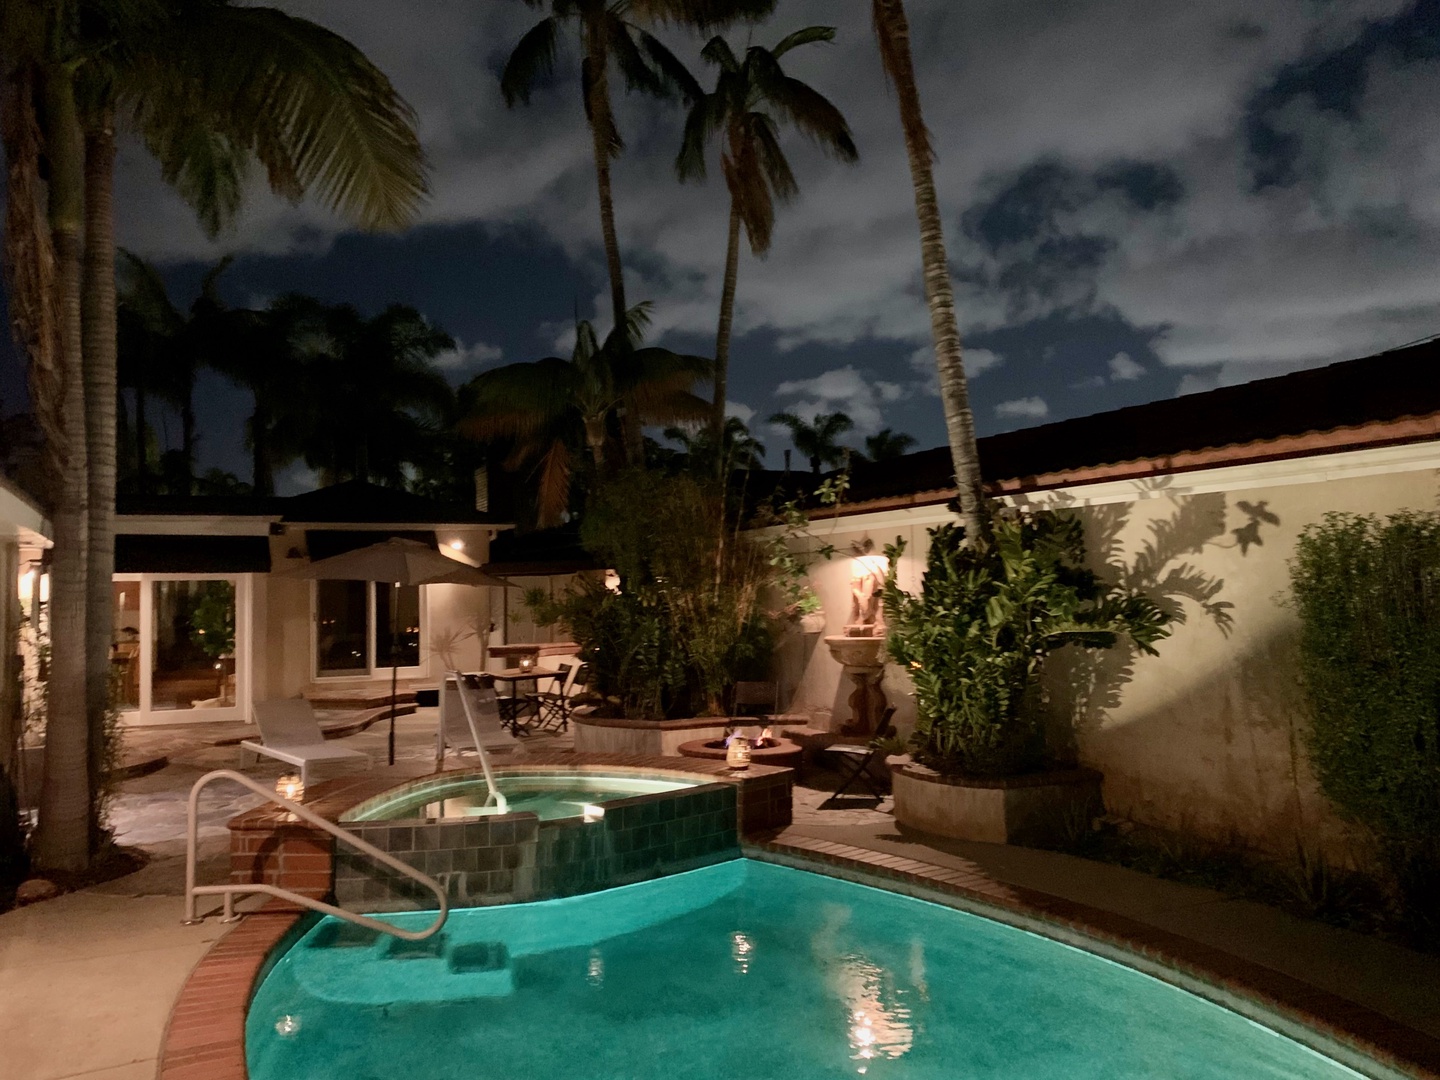 Pool with jacuzzi at night